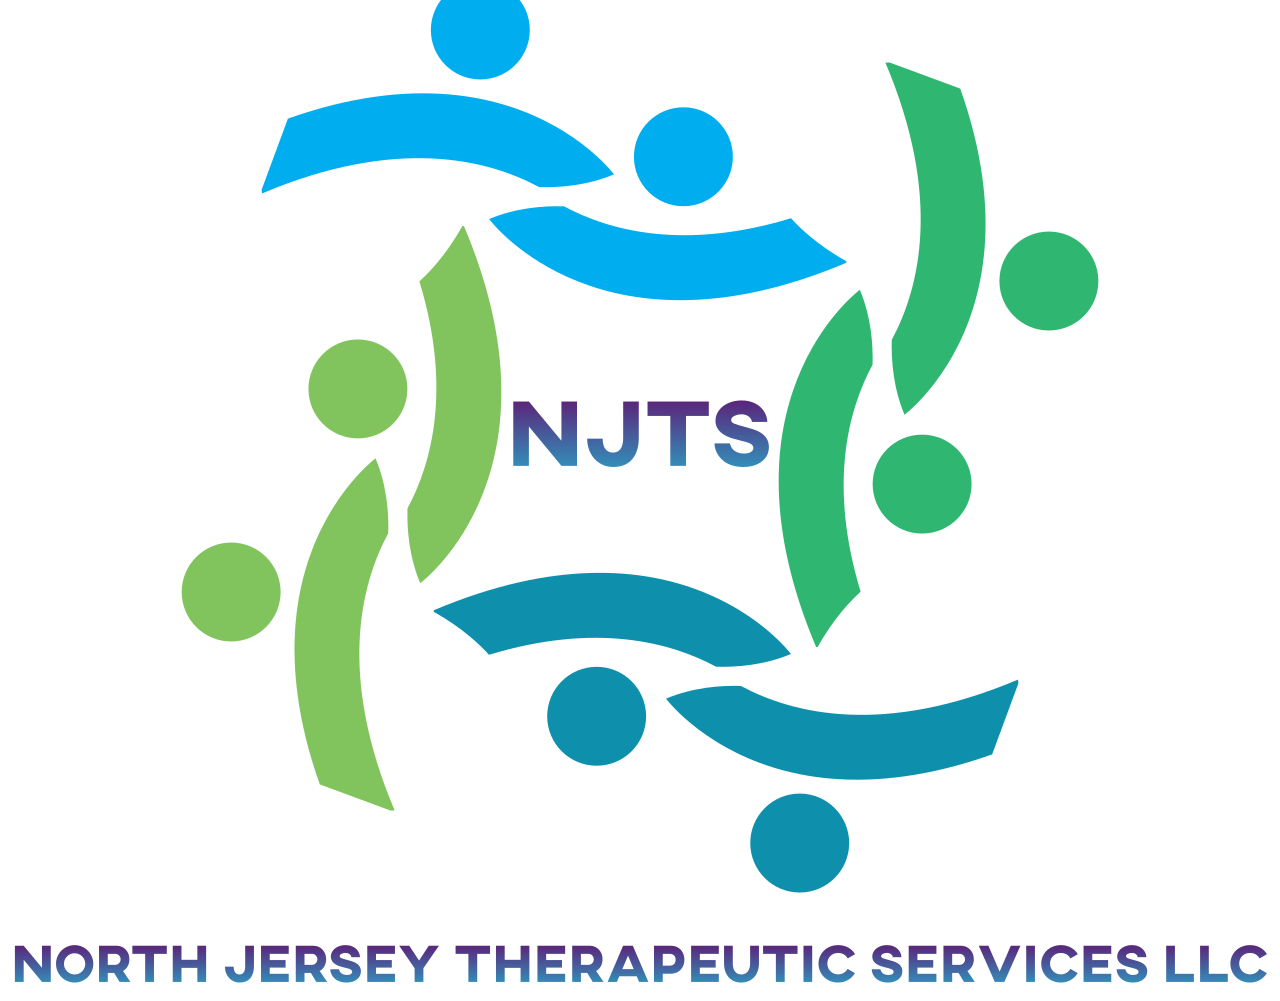 North Jersey Therapeutic Services